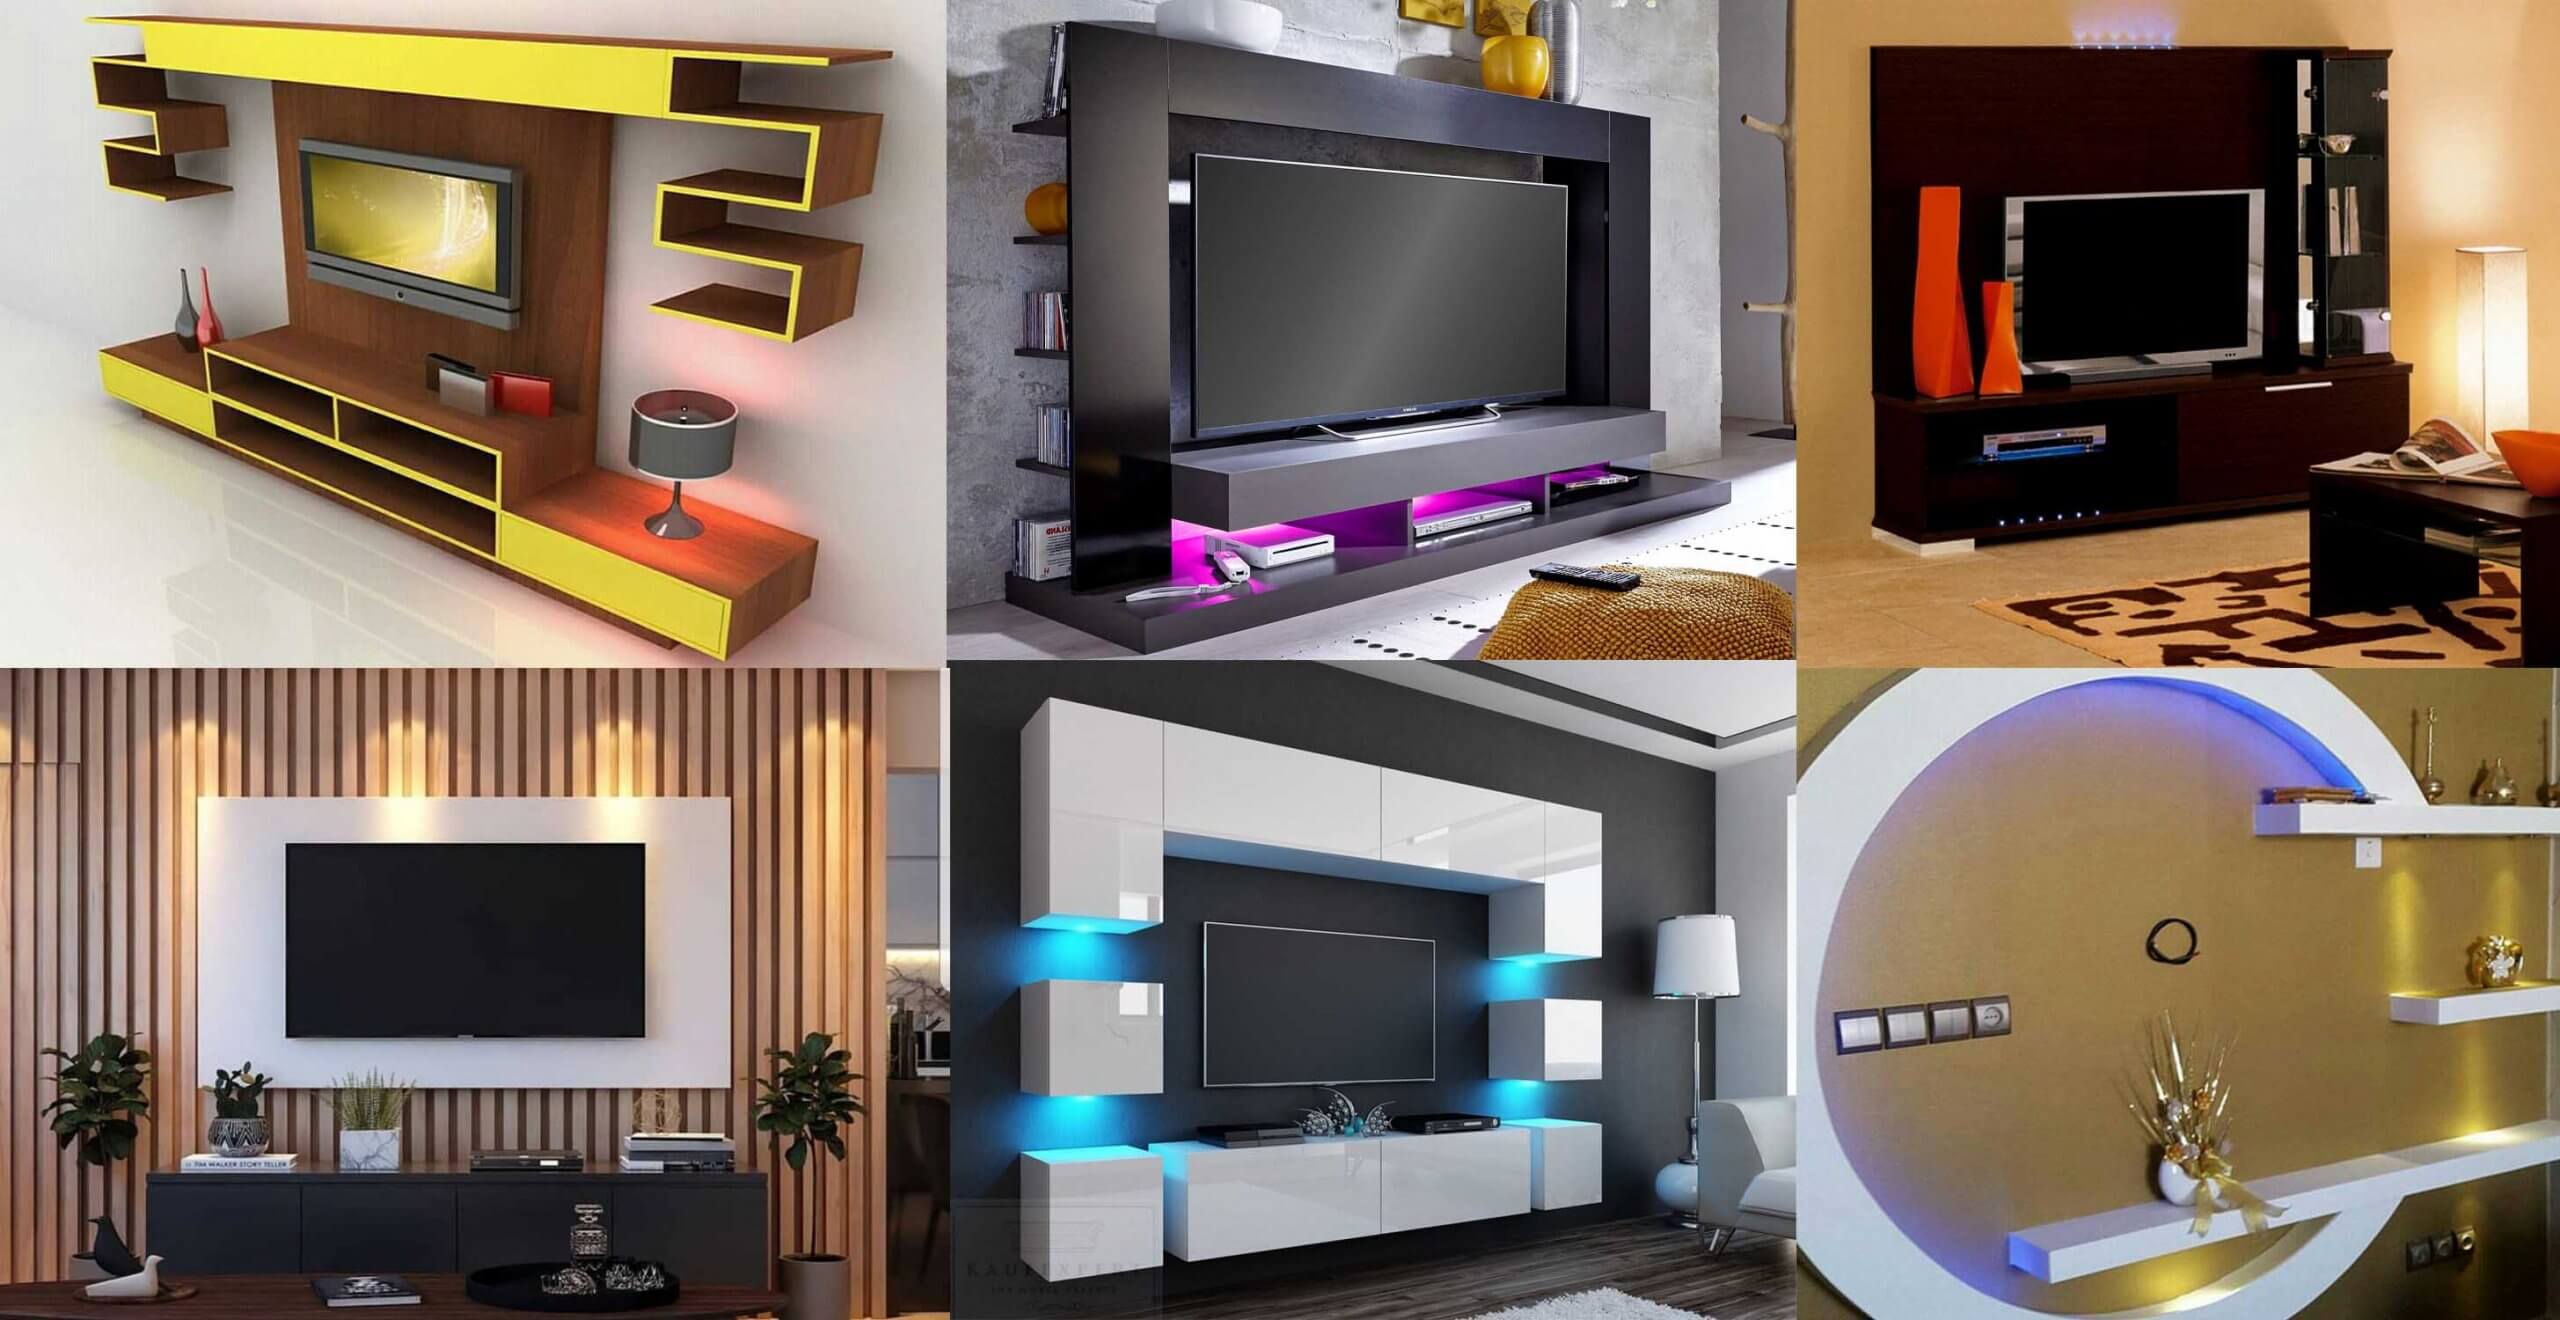 Top 50 Modern TV Stand Design Ideas For 2020 - Engineering ...